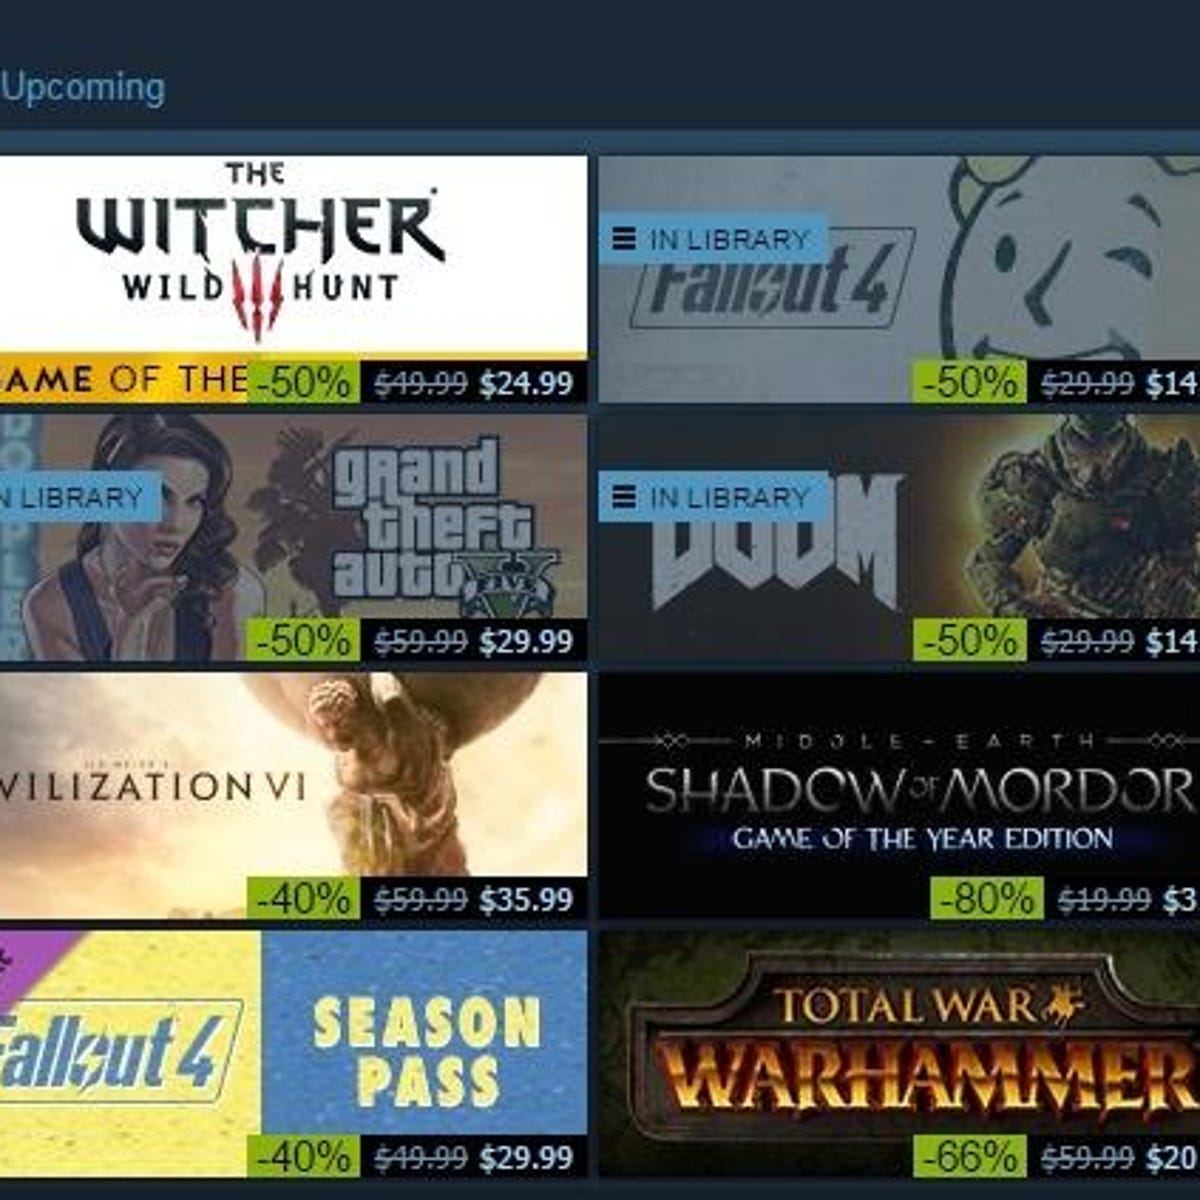 Counter Strike: Global Offensive Is Dominating PUBG & GTA 5 On Steam